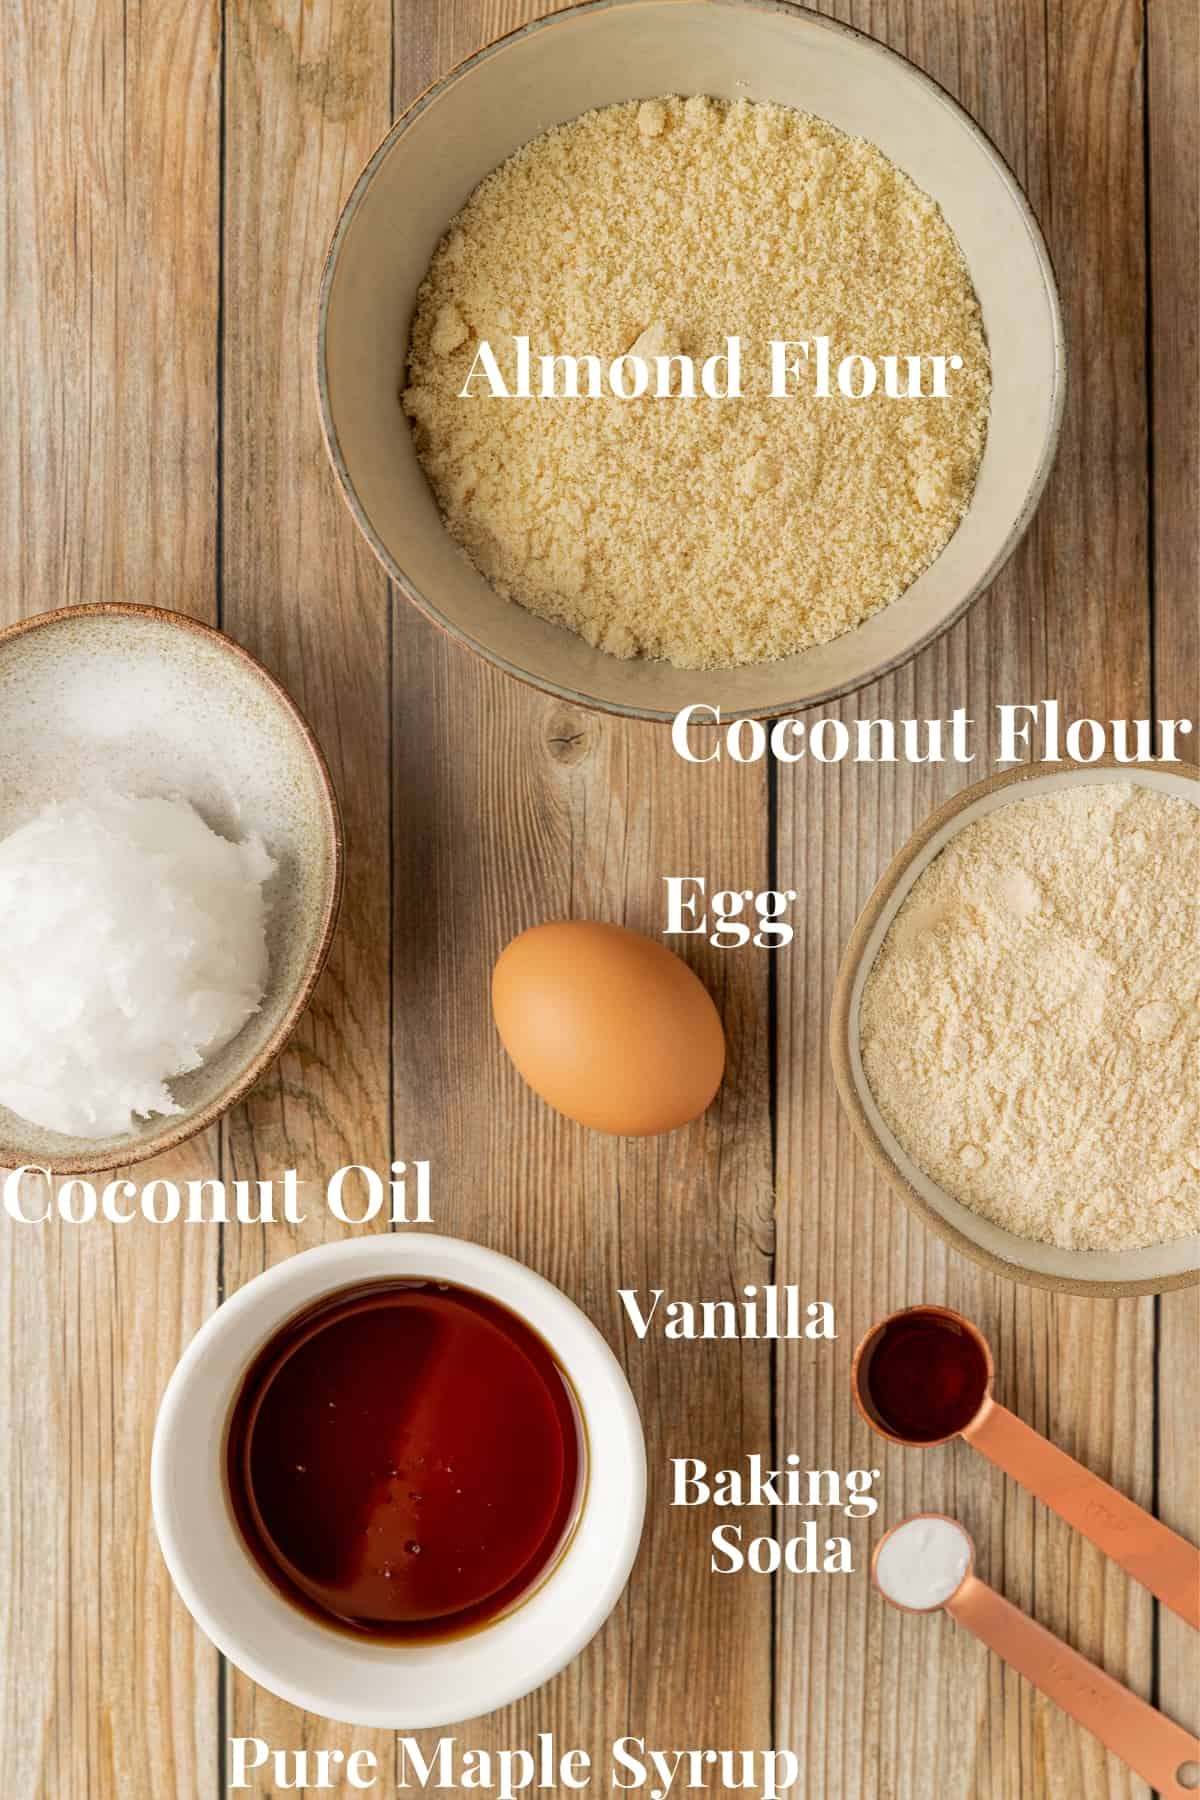 An overview shot of the ingredients needed for paleo shortbread crust